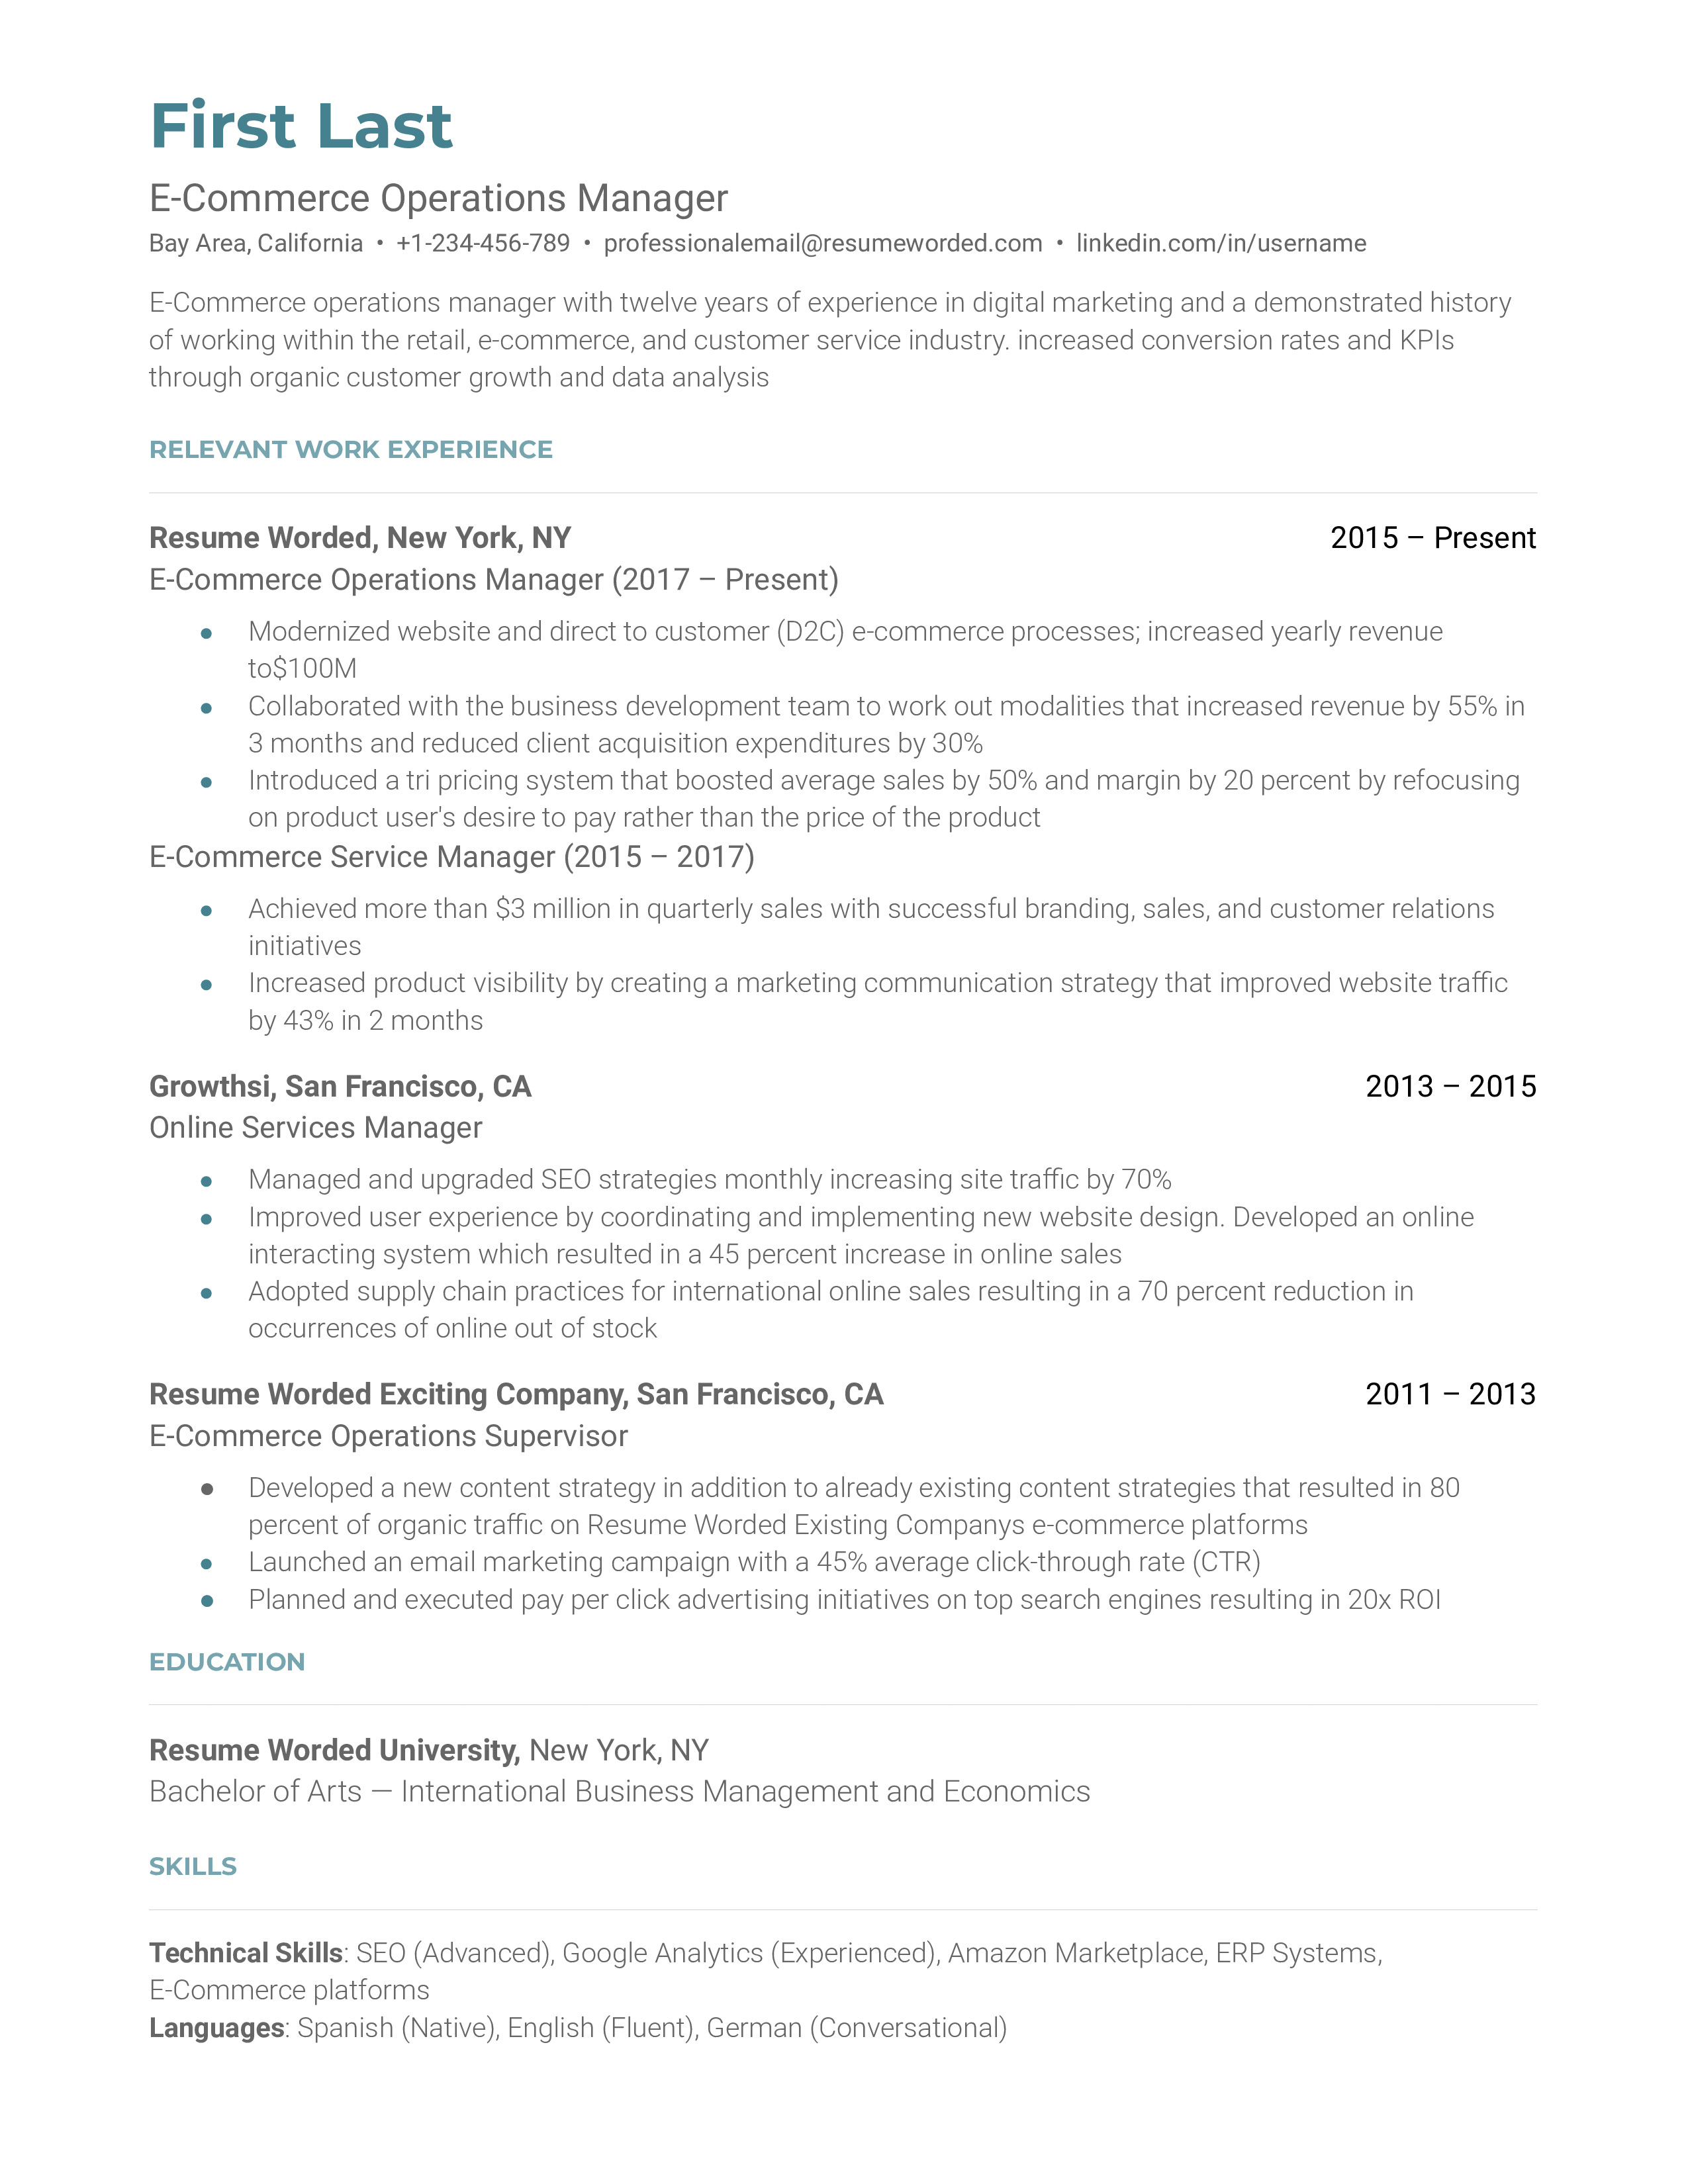 An ecommerce operations manager resume sample that highlights the applicant's operations specialization and skill set.